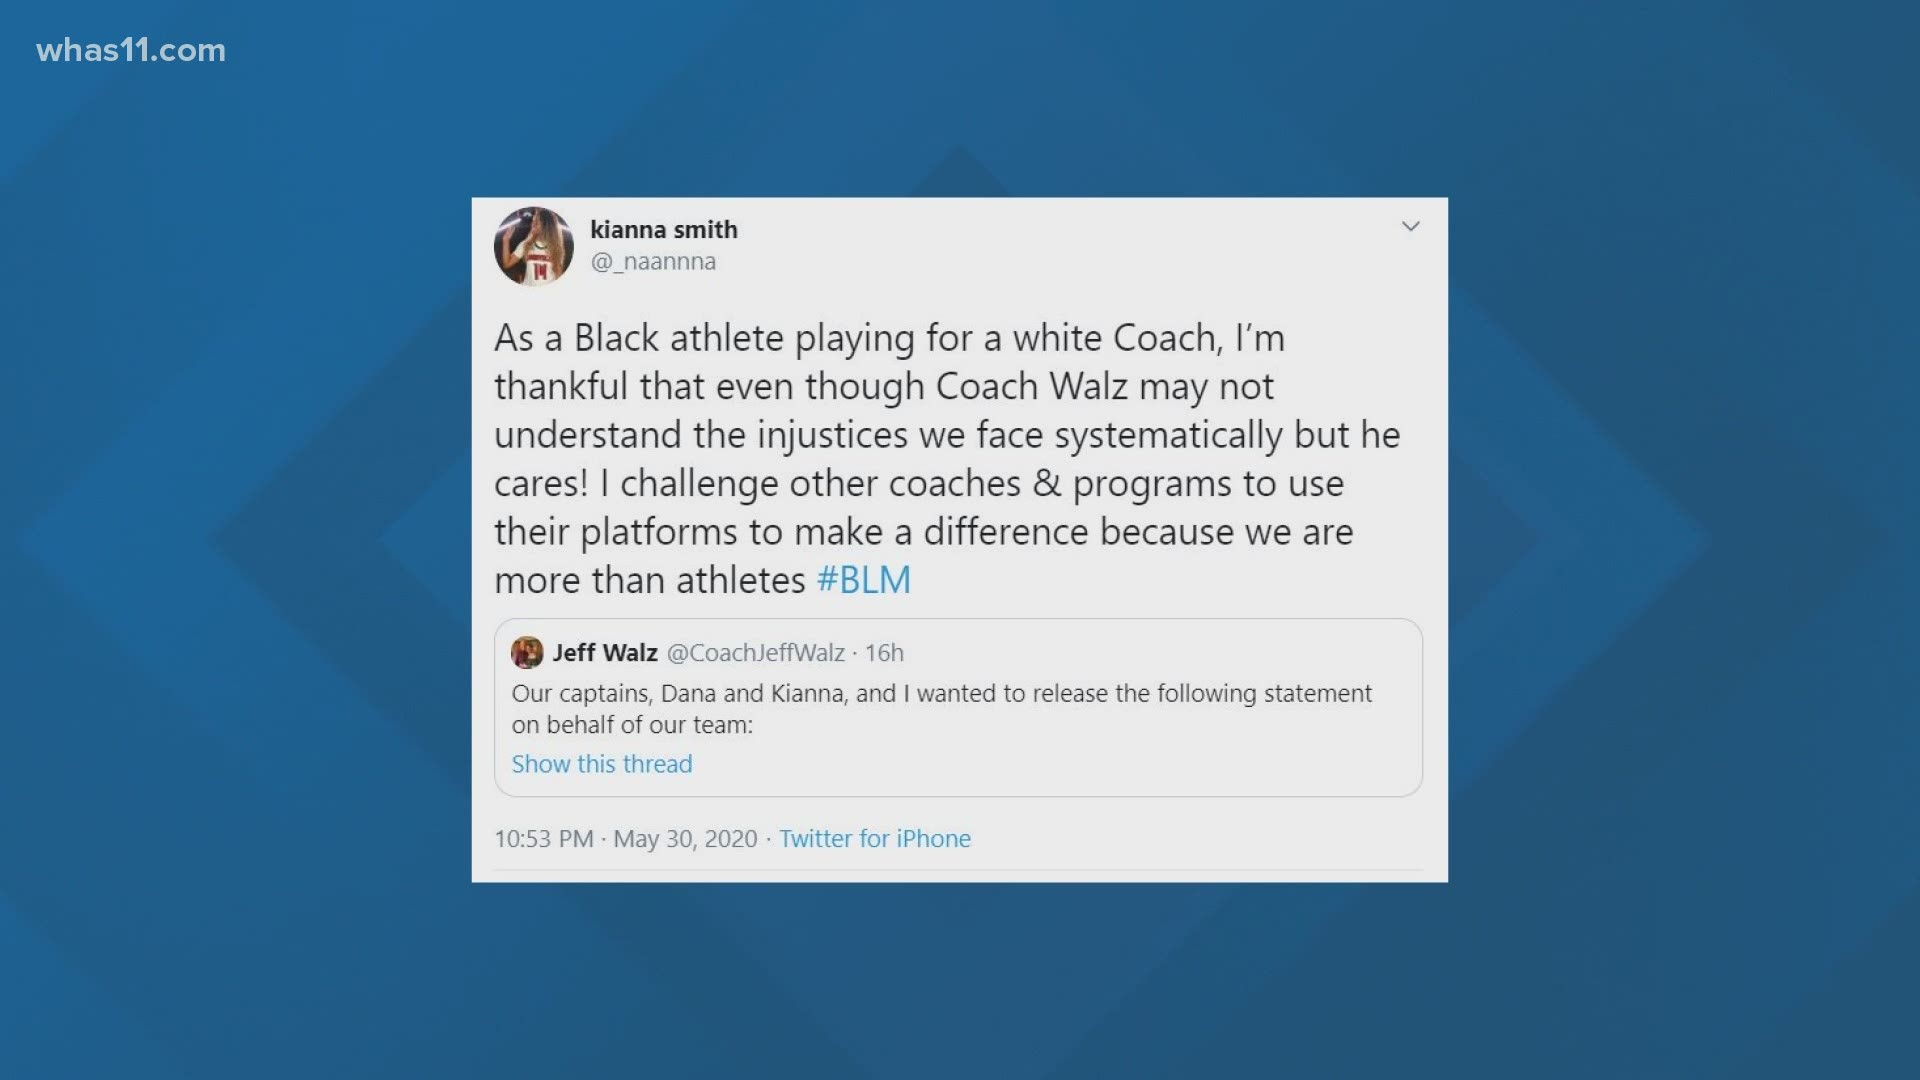 Local coaches and athletes are adding their voices to the cause and speaking out to show unity and solidarity in wake of deaths of African-Americans by police.